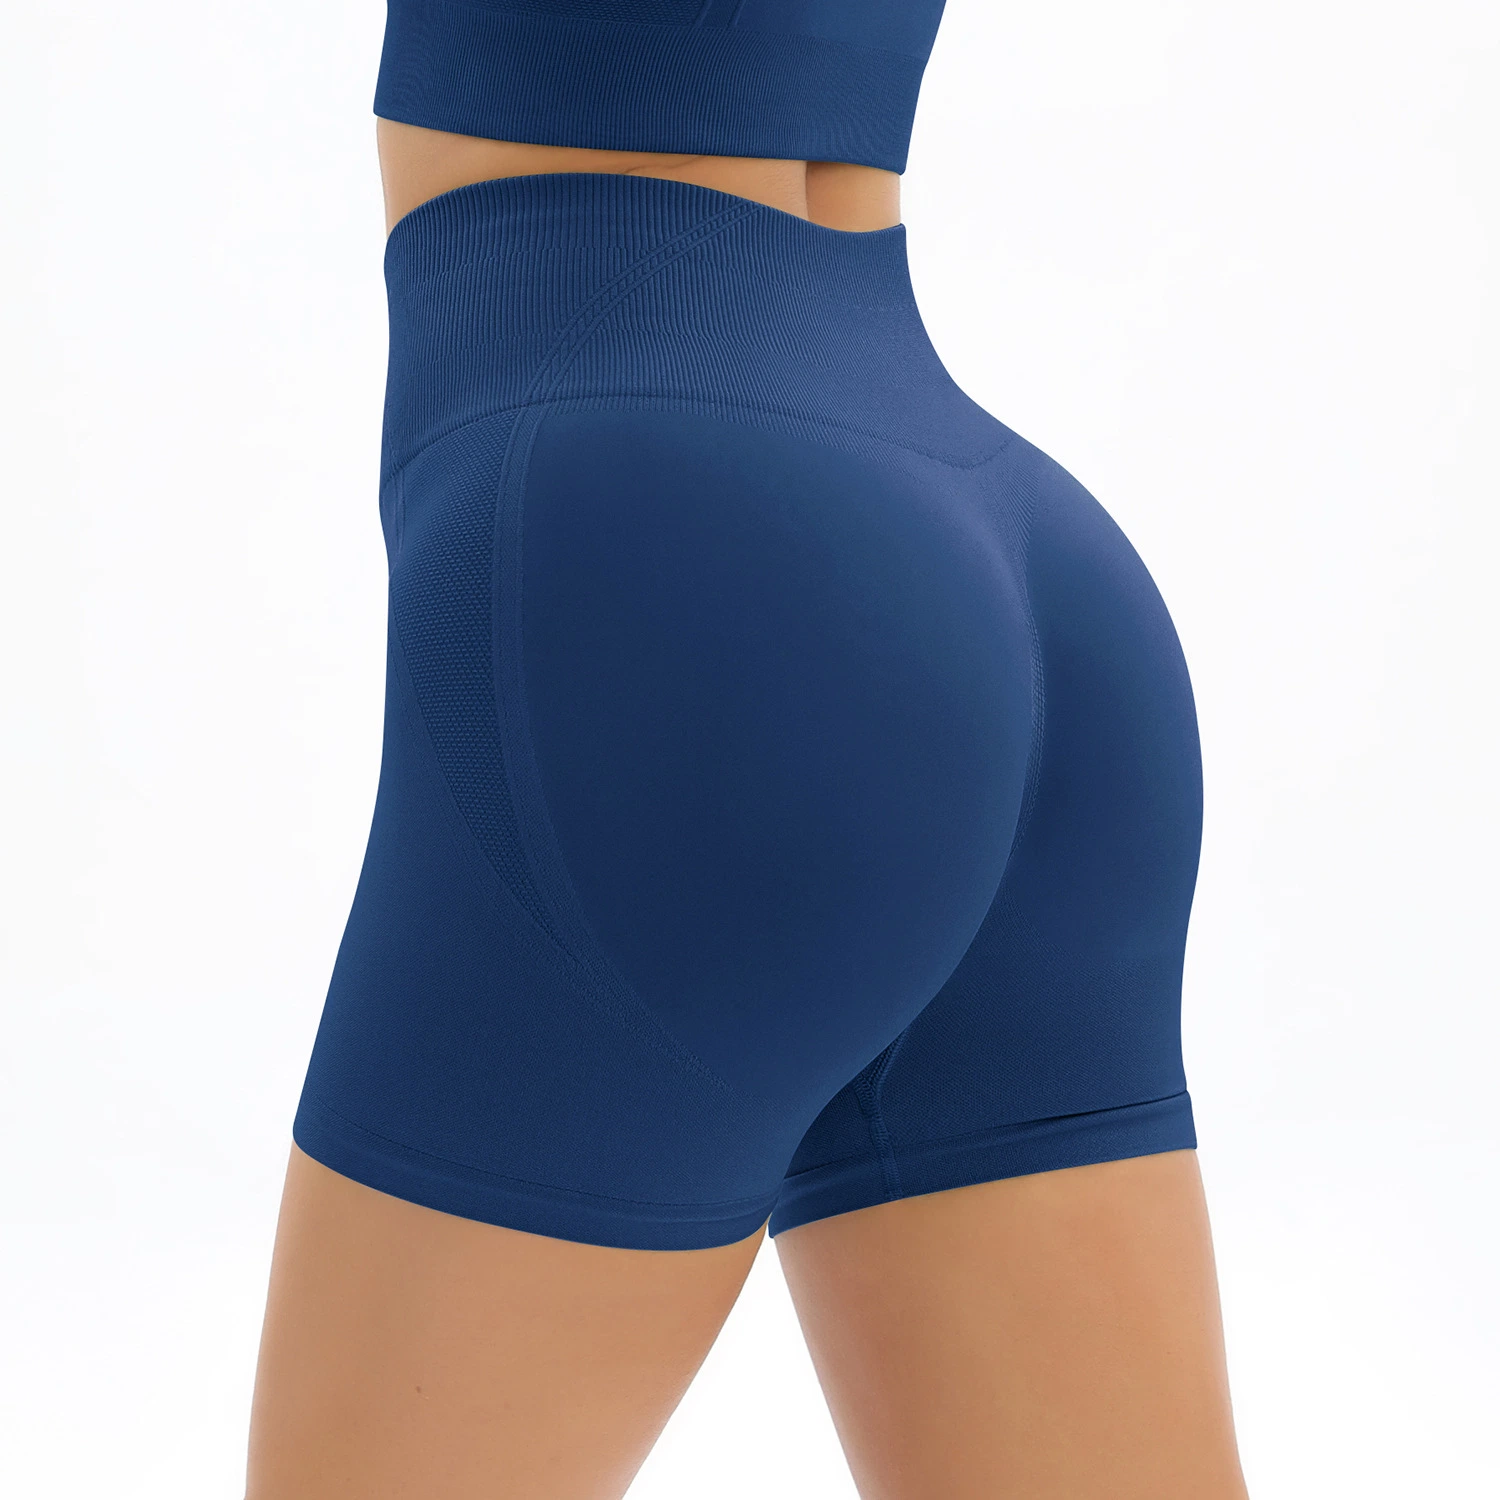 High Waisted Seamless Gym Sports Women Yoga Shorts Breathable Slim Fit Sweatpants Sexy Peach Butt Hip Lift Workout Short